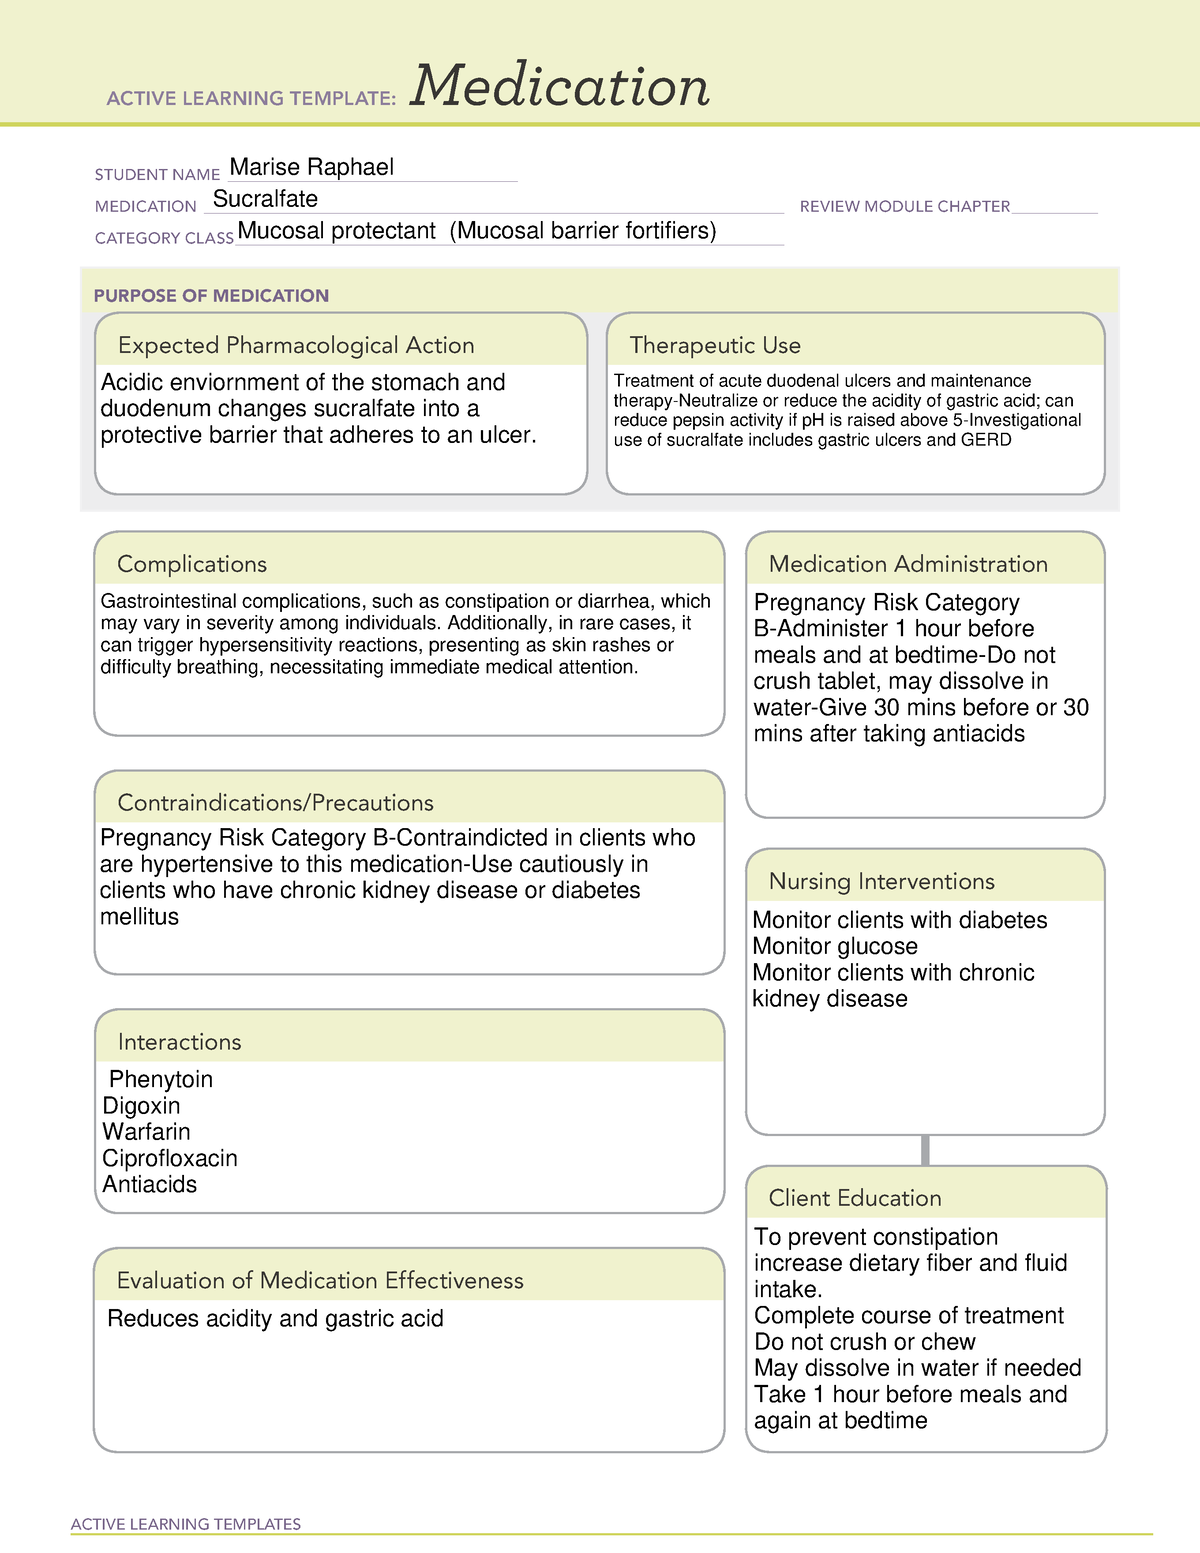 Sucralfate medication profile ACTIVE LEARNING TEMPLATES Medication